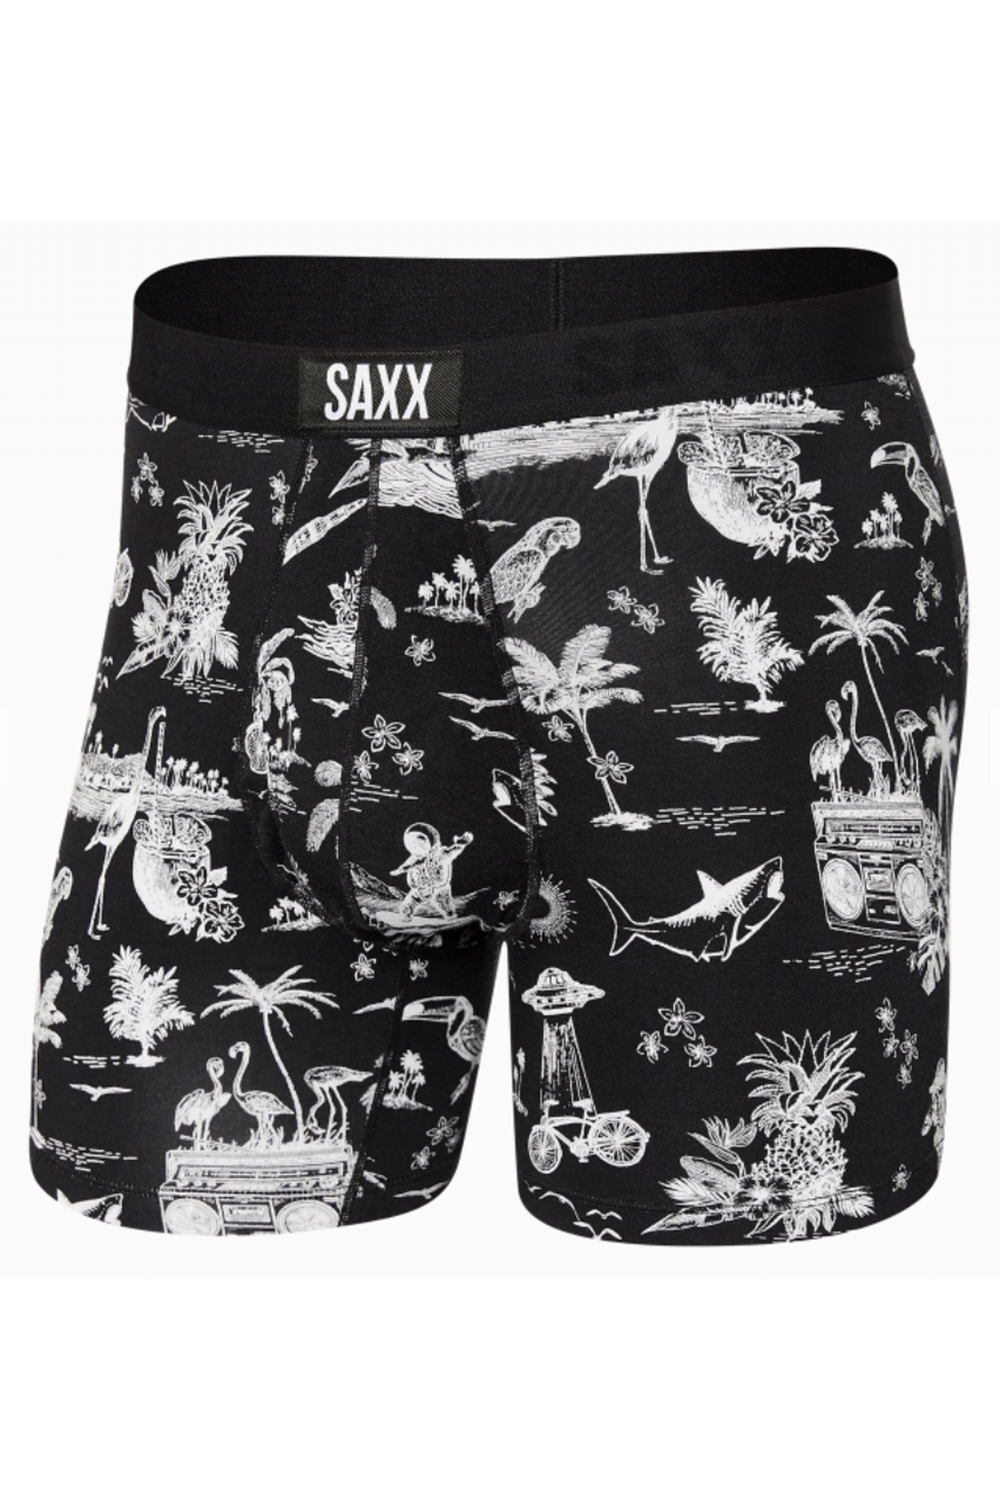 Ultra Boxer Brief - Black Astro Surf & Turf – Shop Whimsicality